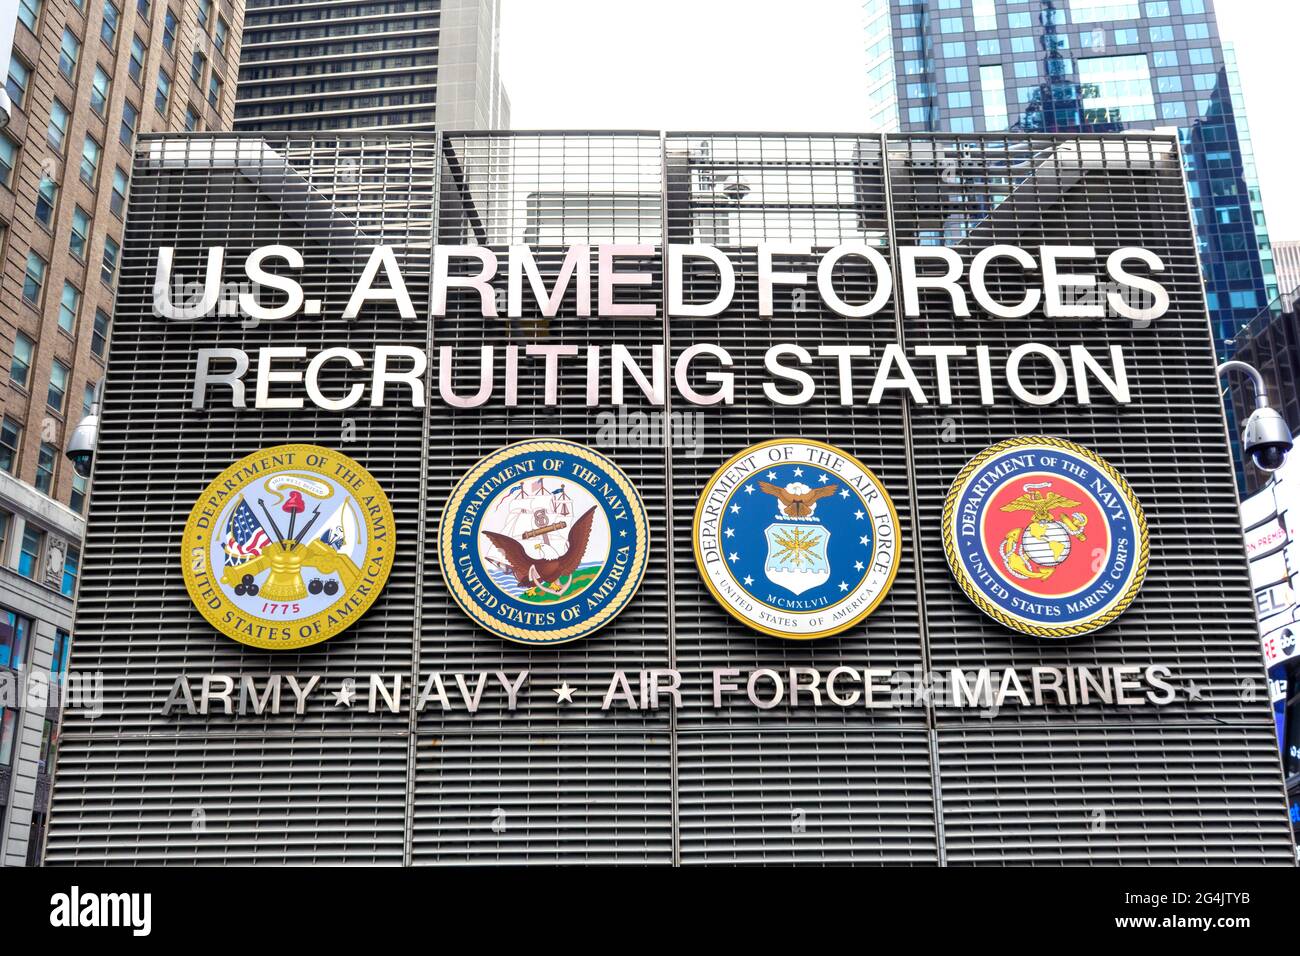 U.S. Armed Forces Recruiting Station sign at Times Square station that recruits for the four branches of the U.S. Armed Forces Army, Navy, Air Force a Stock Photo